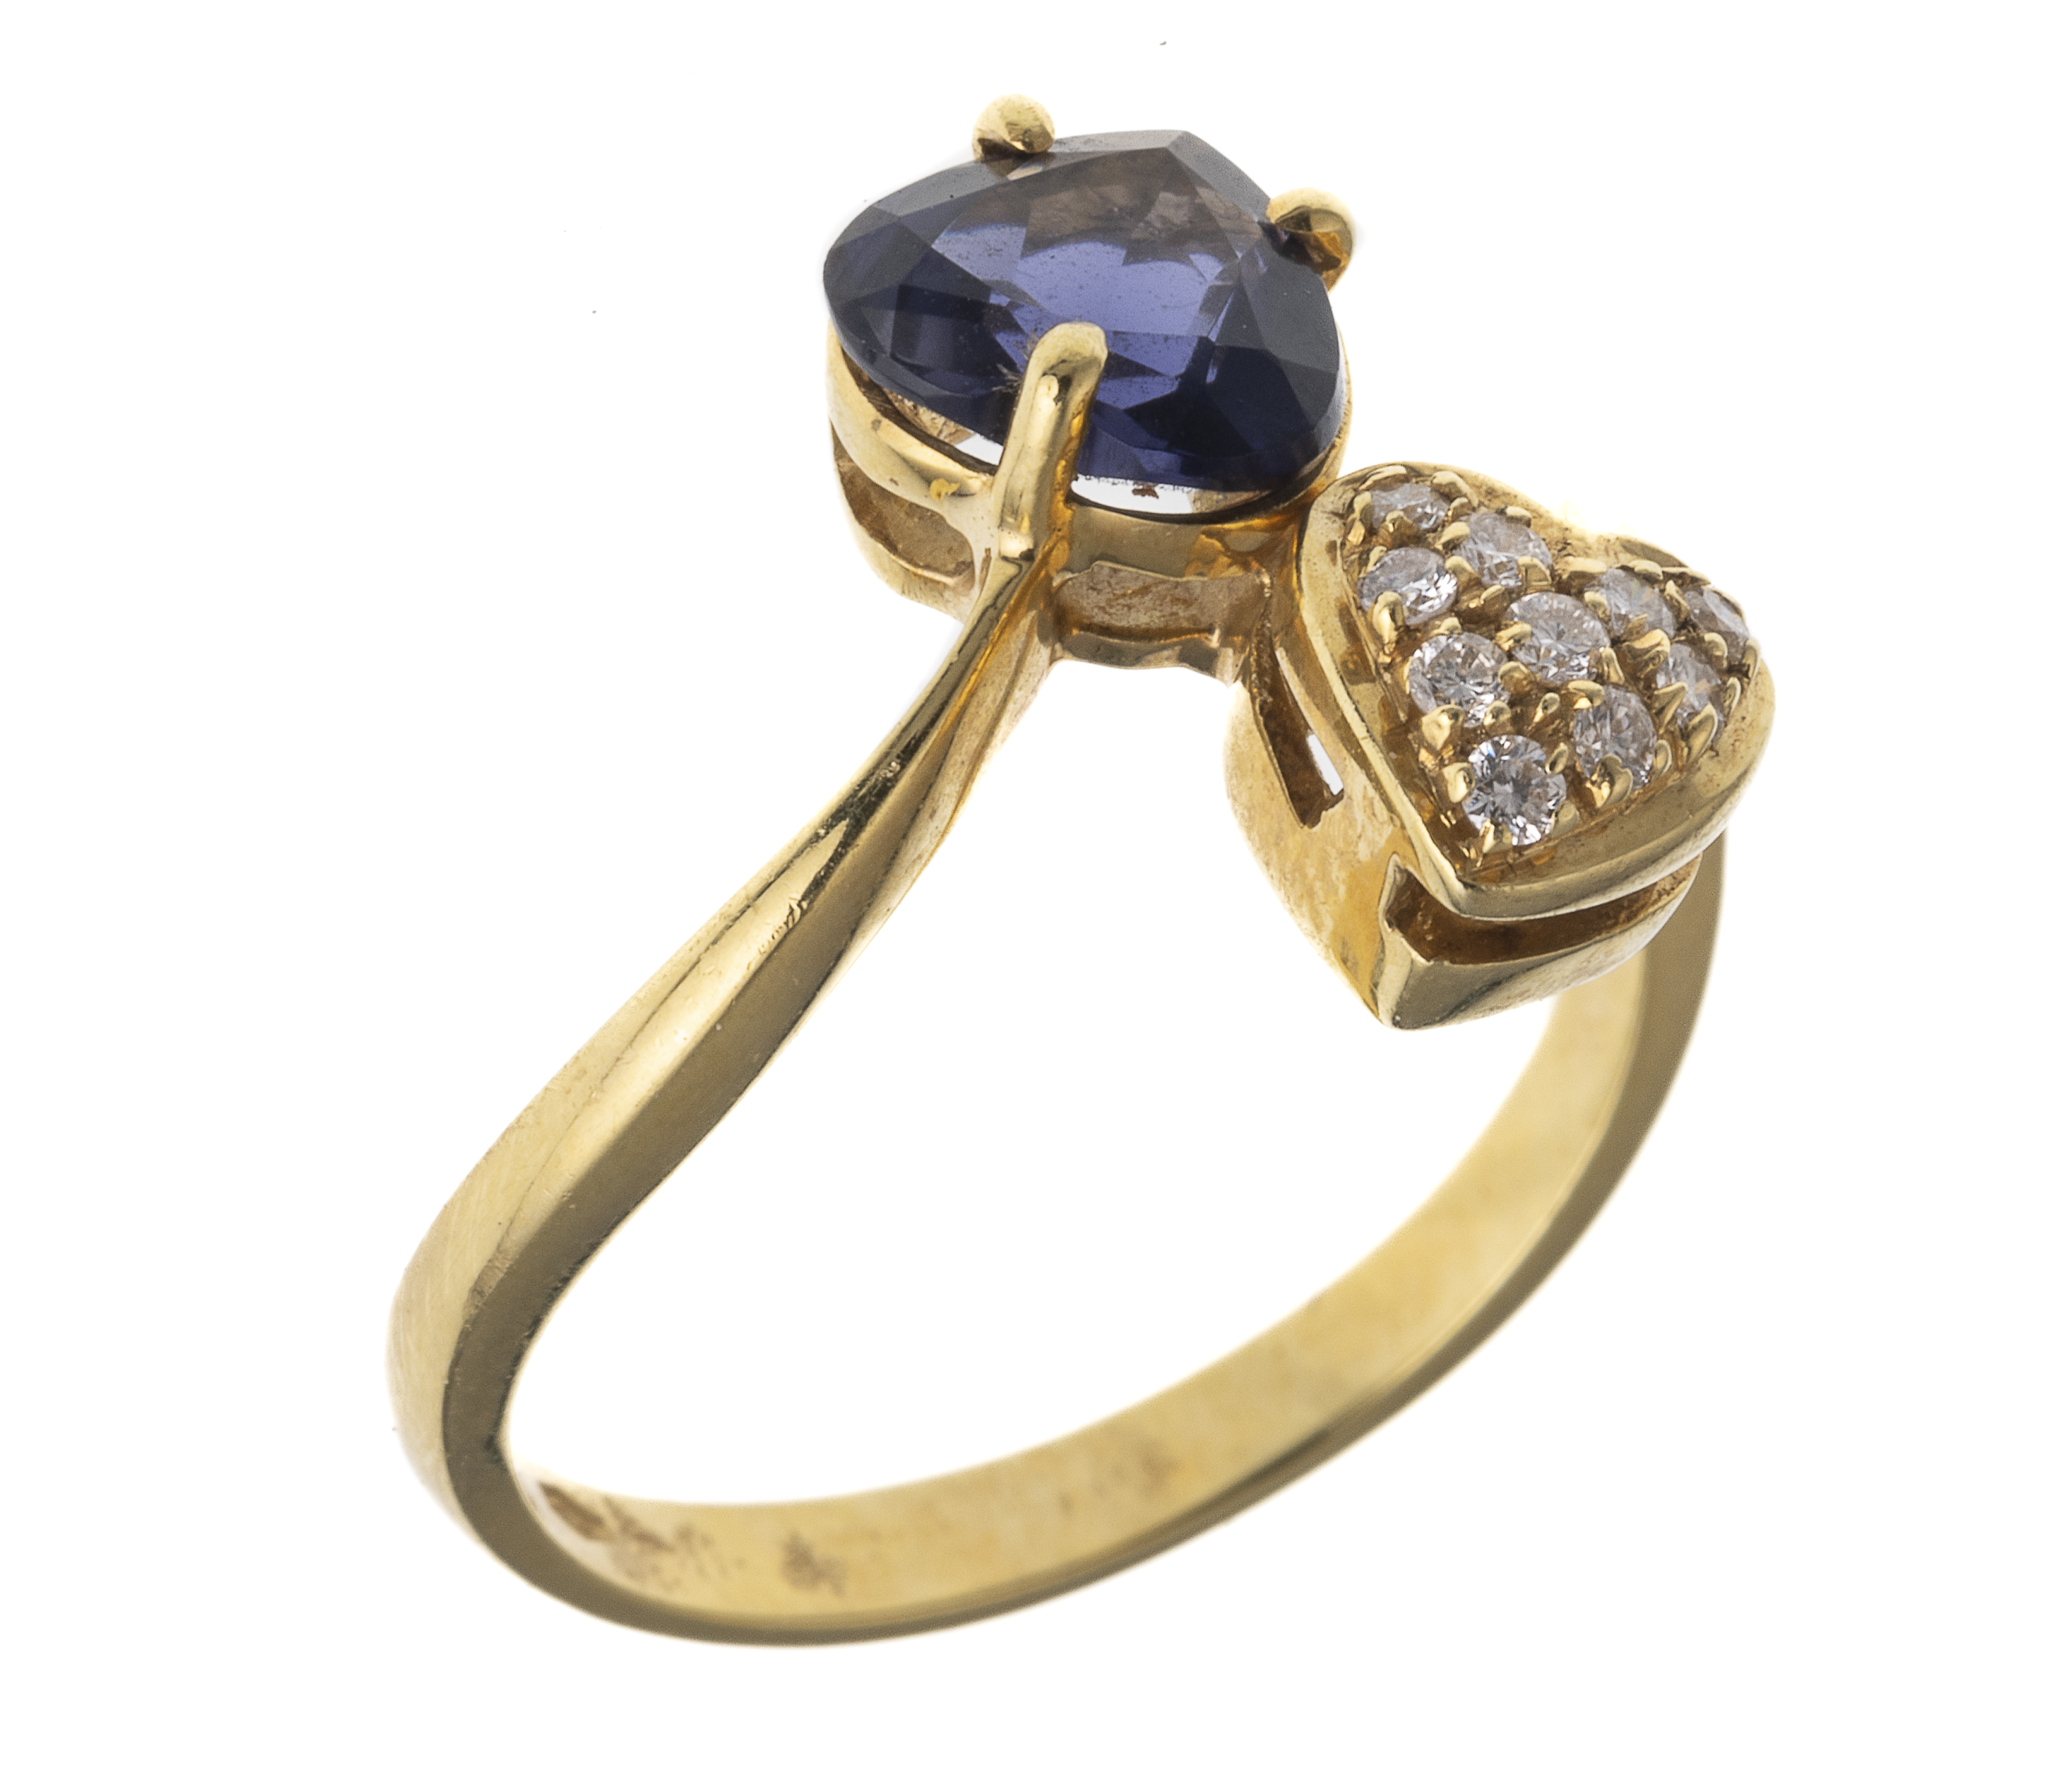 GOLD RING WITH DIAMONDS AND LOCITE